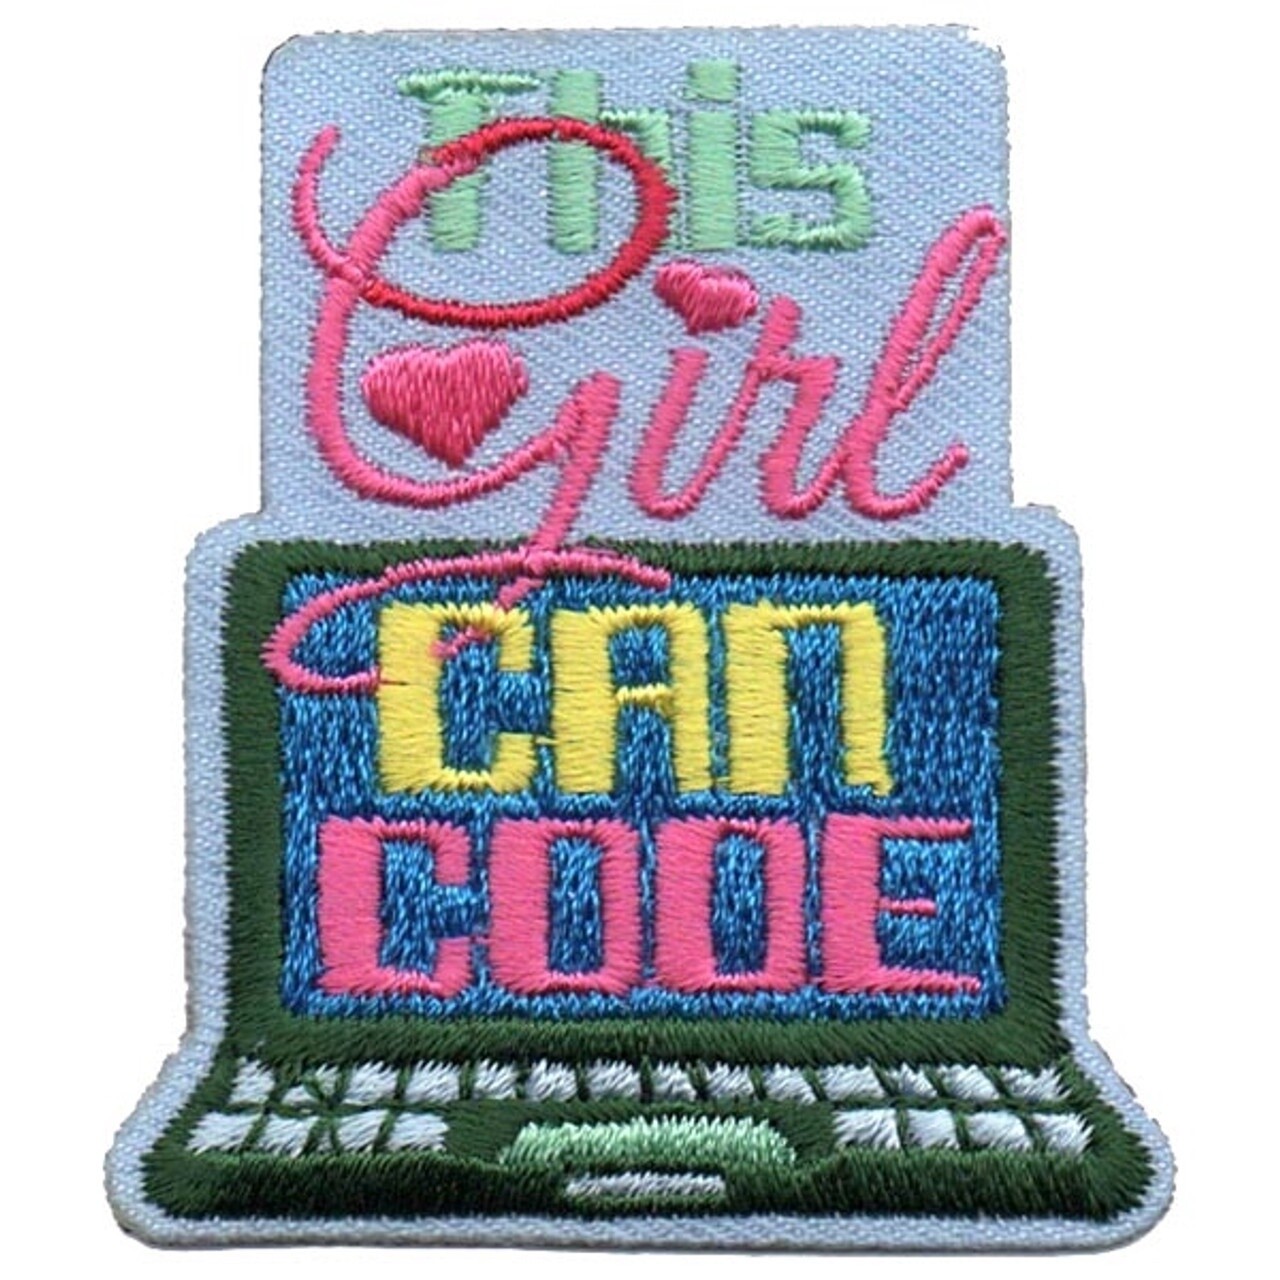 This Girl Can Code Patch